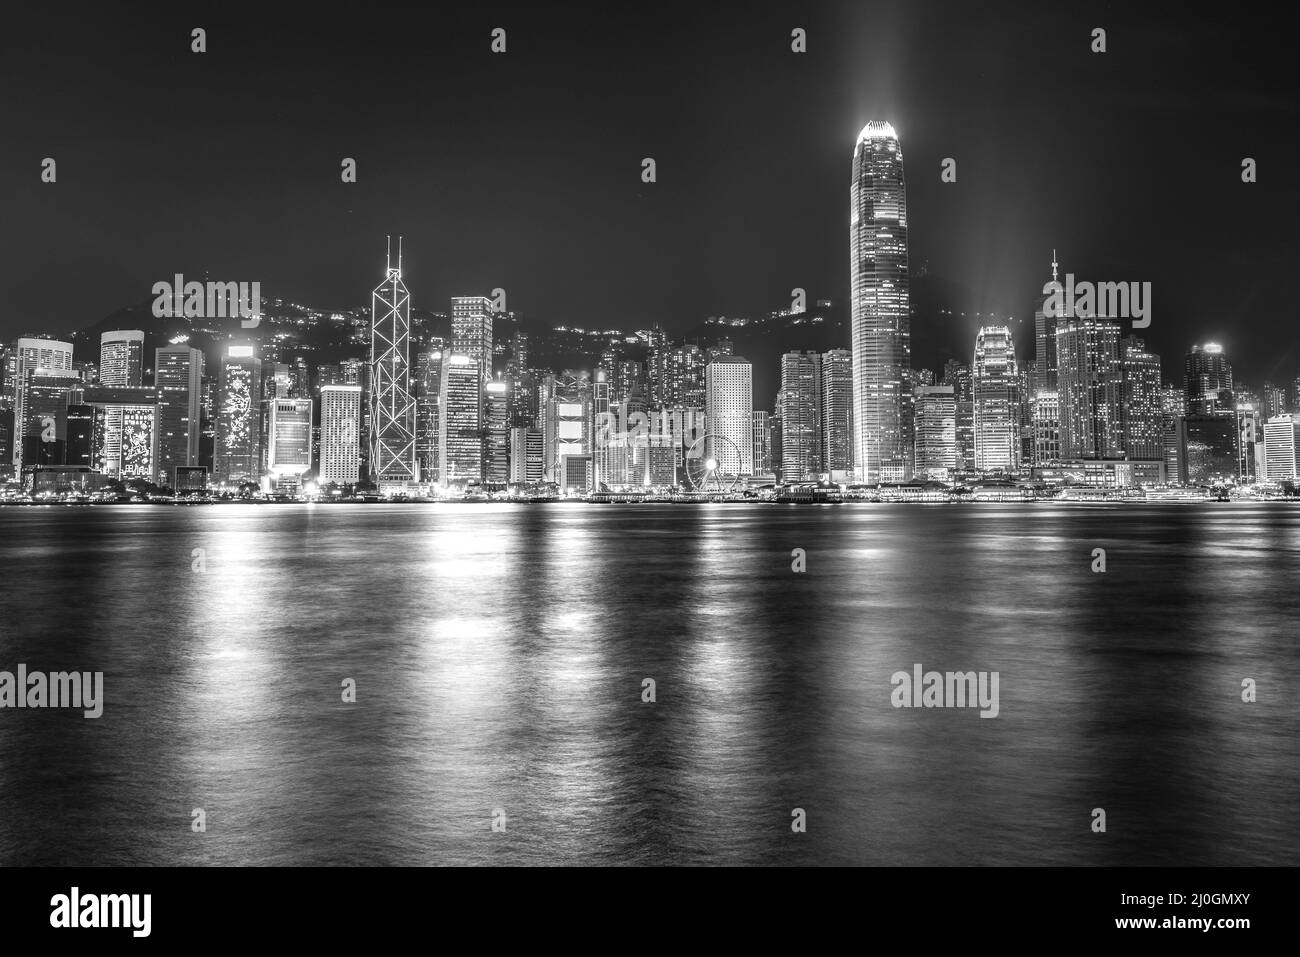 The incredible night cityscape view of lights on the water on Victoria Harbour in Hong Kong Stock Photo